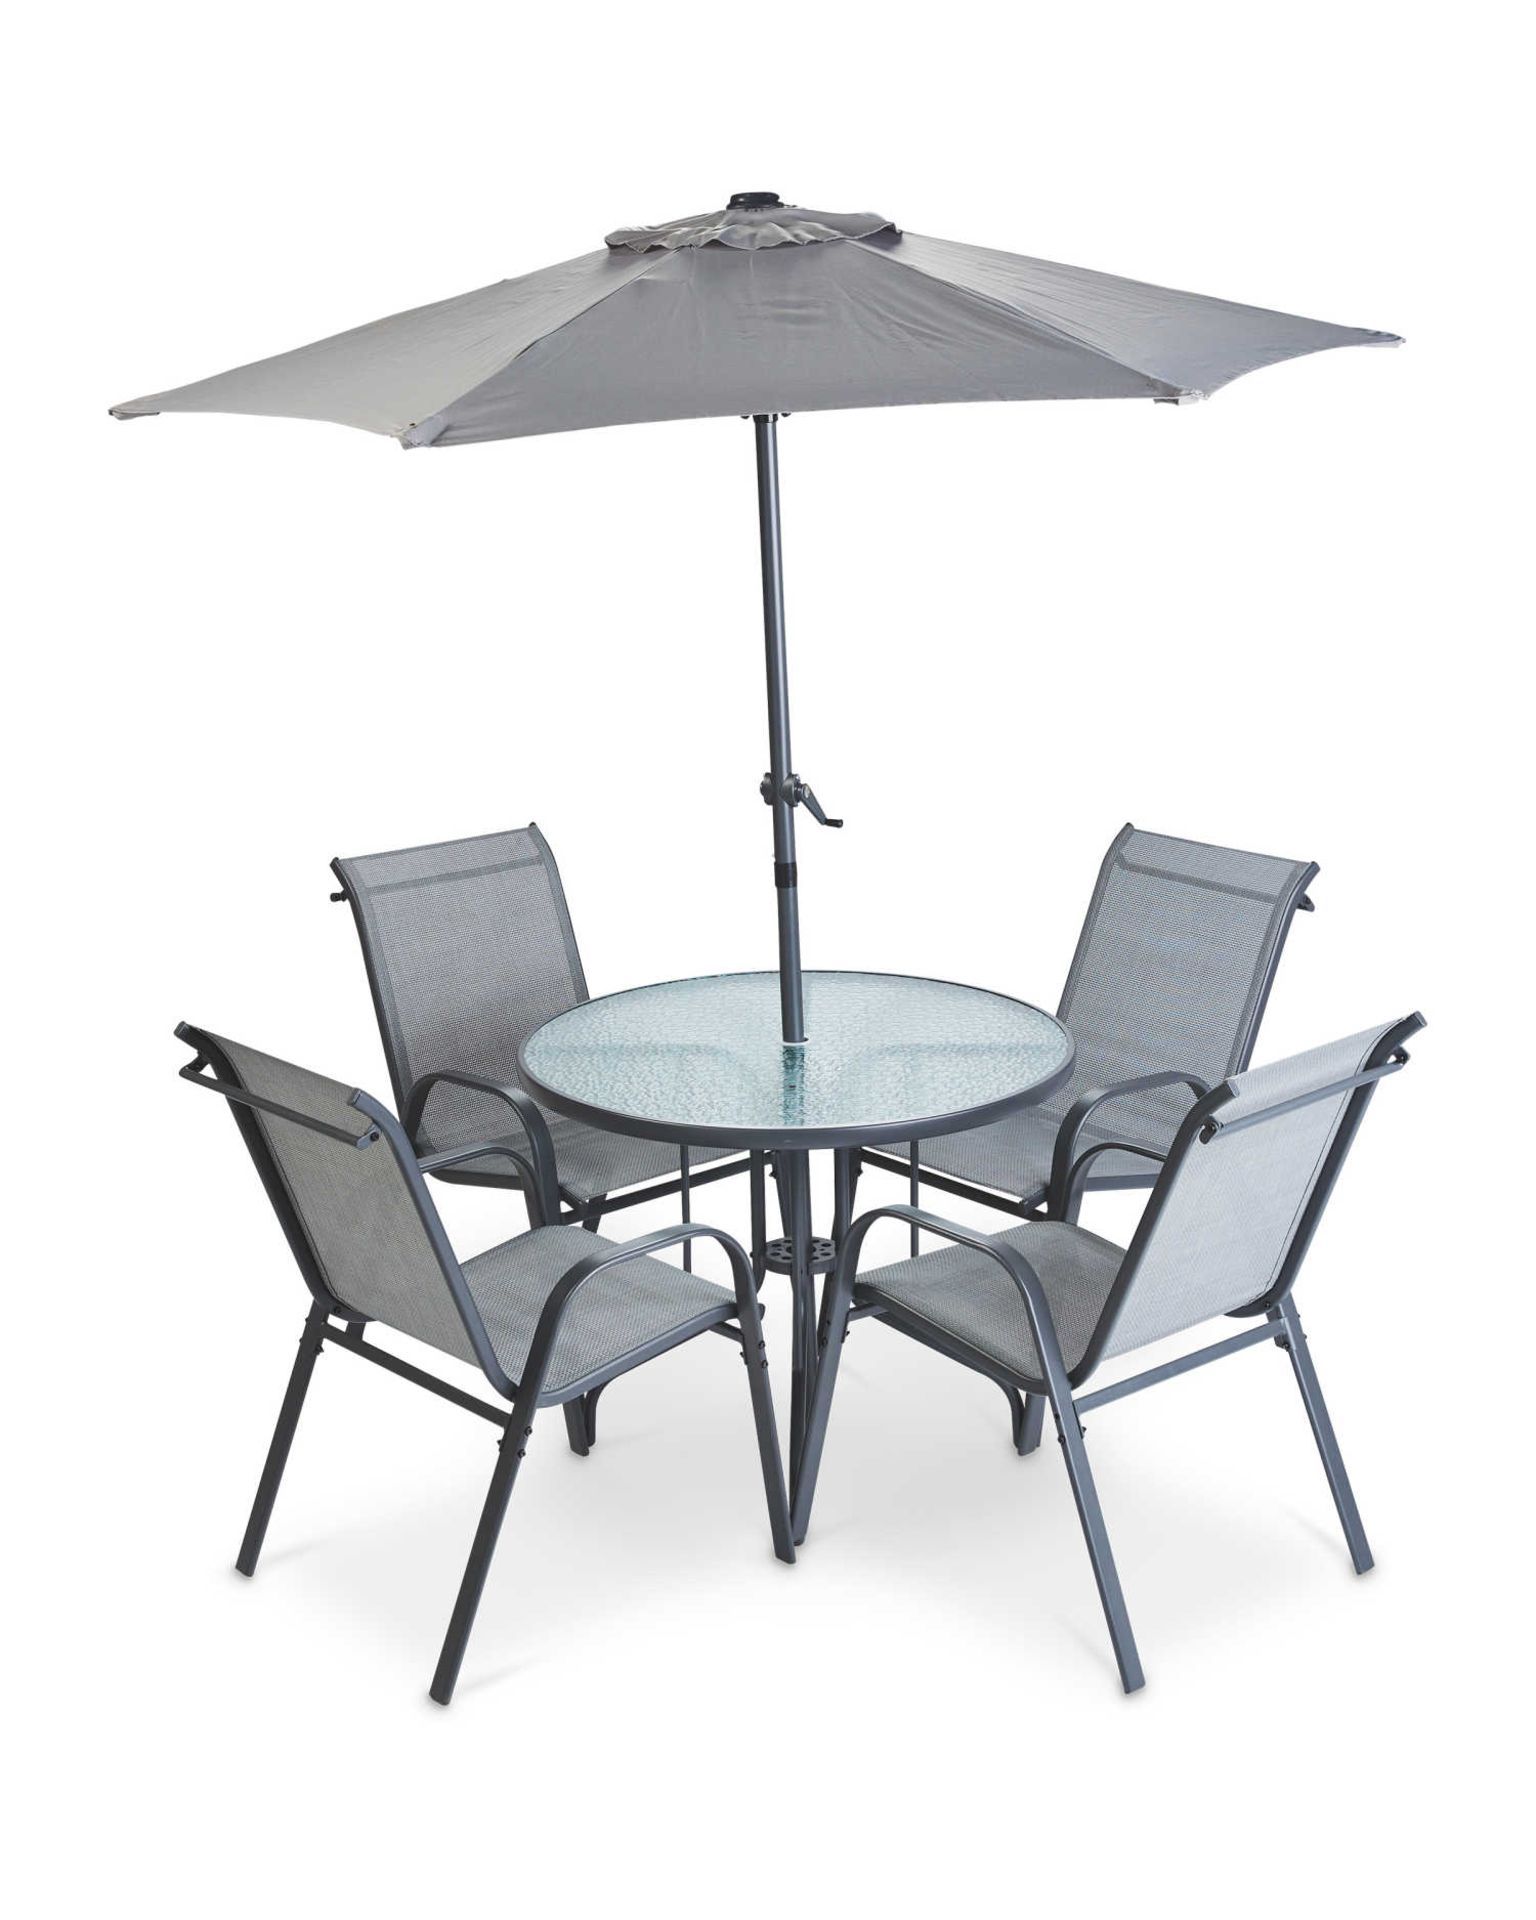 6 Piece Patio Furniture Set. Give your garden a new look with the 6 Piece Patio Furniture Set.